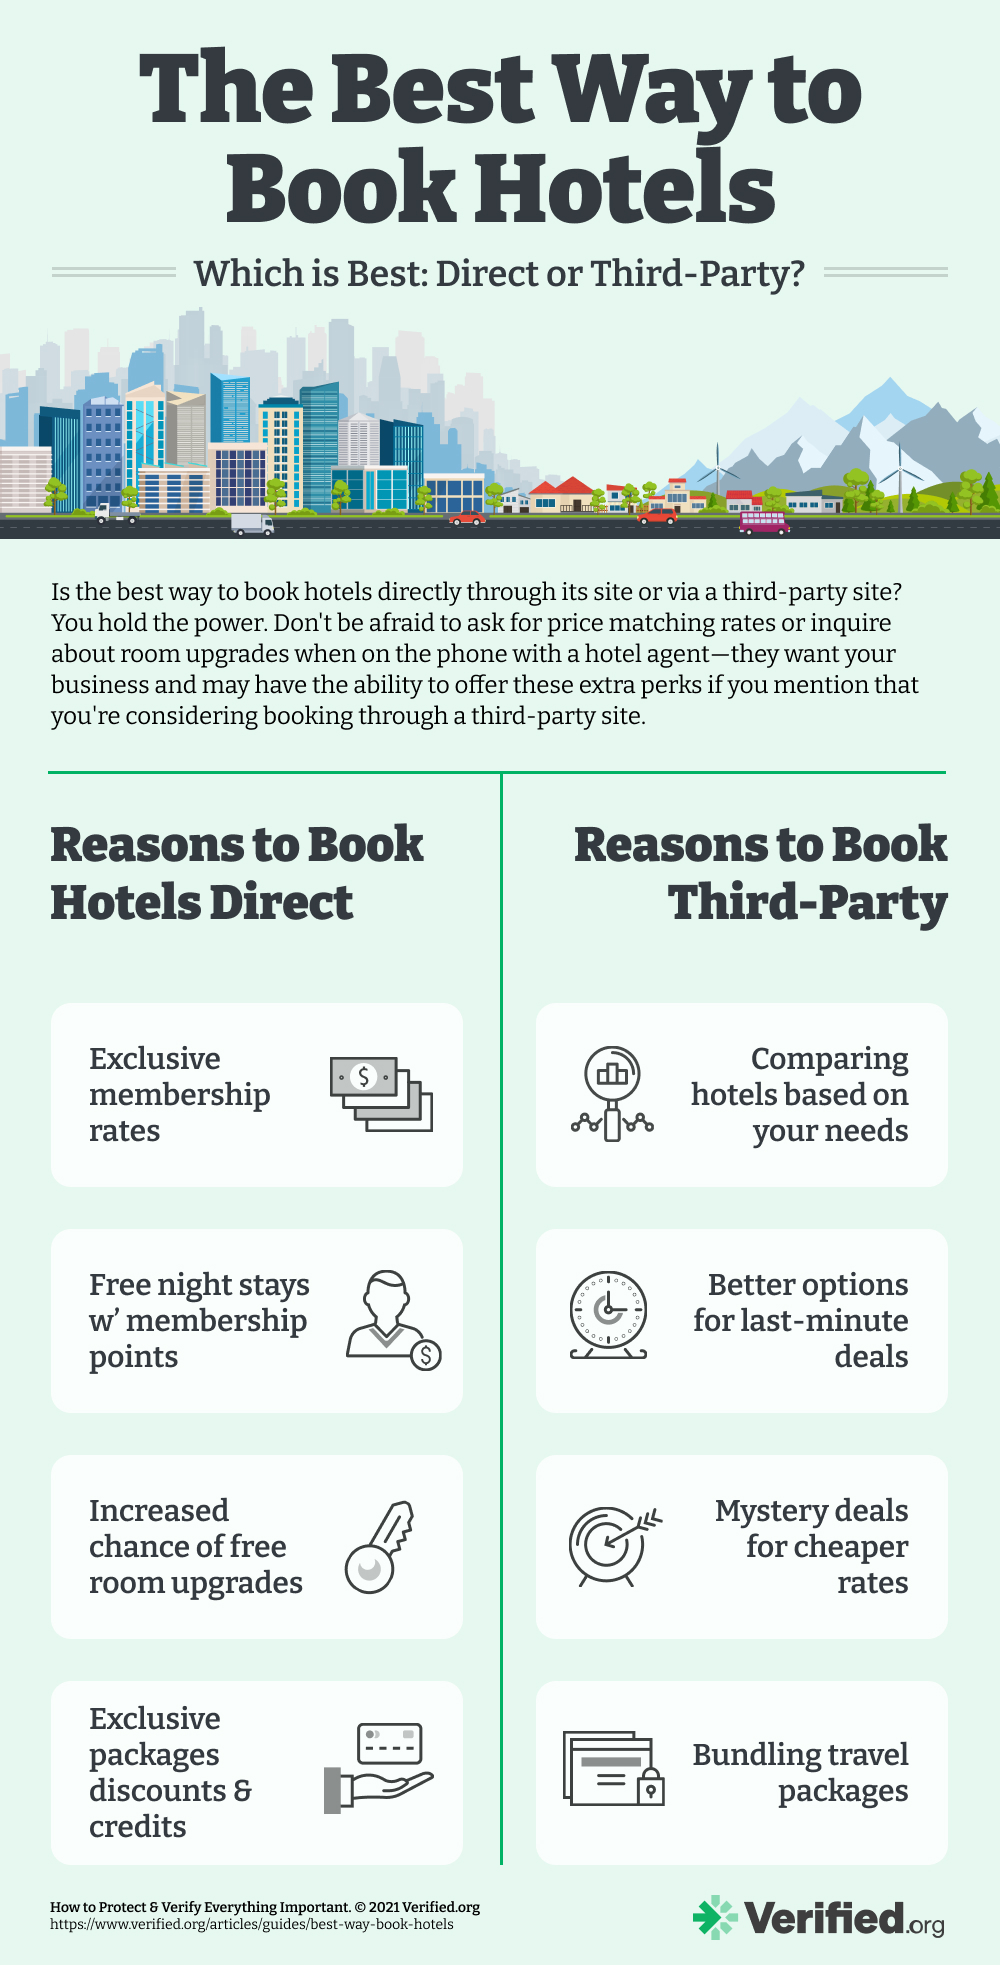 Direct or Third-Party: What is The Best Way to Book Hotels